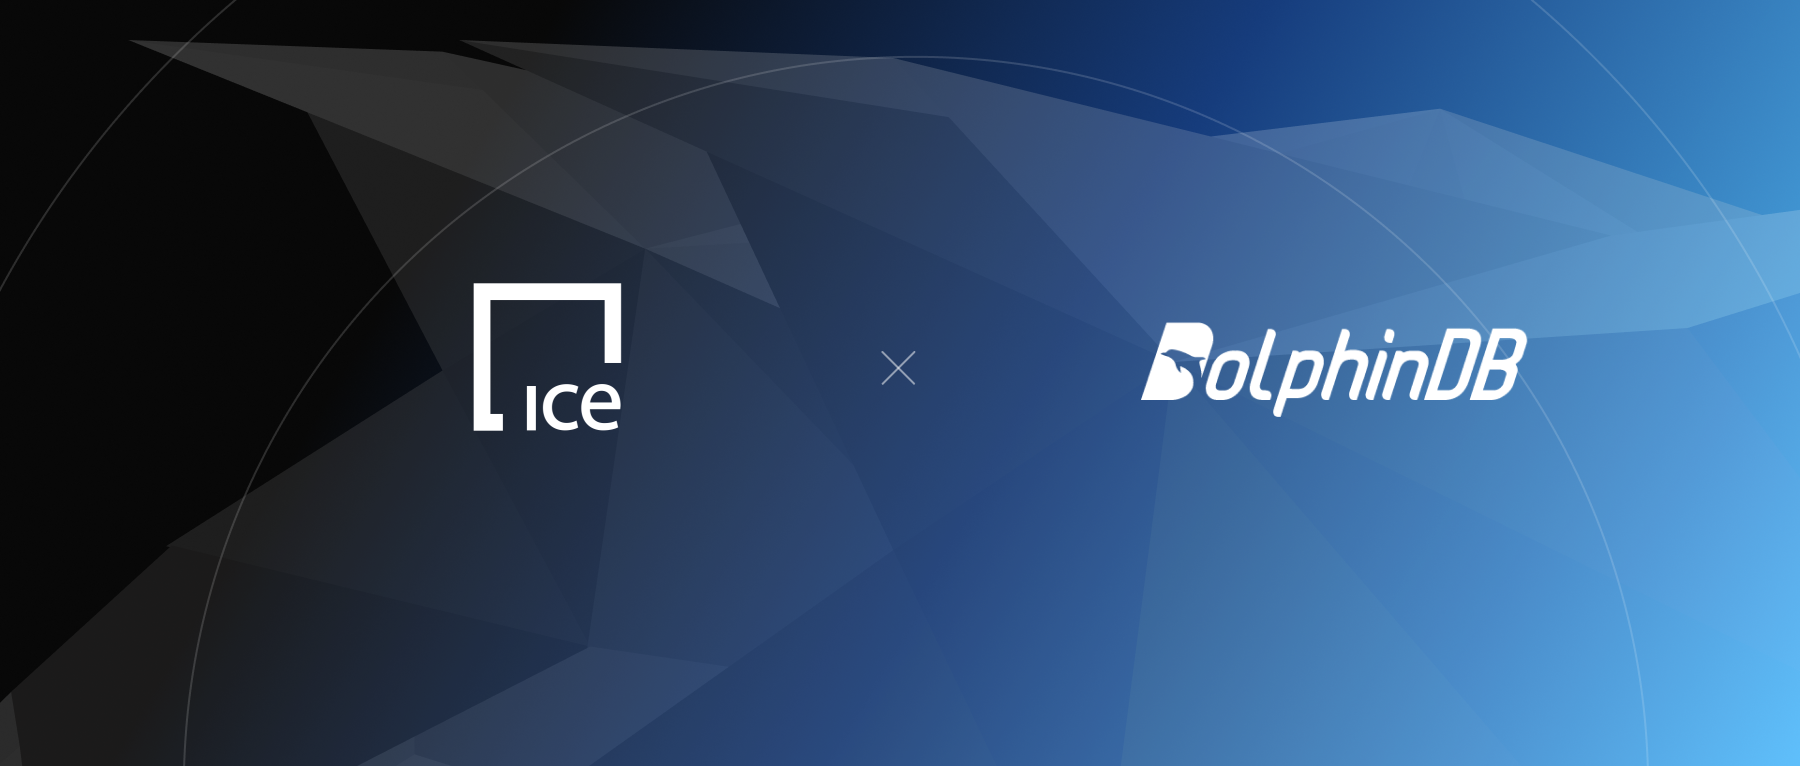 DolphinDB Collaborates with Intercontinental Exchange Group (ICE) to Jointly Create a New Approach to Managing and Analyzing Cross-Asset Global Market Data